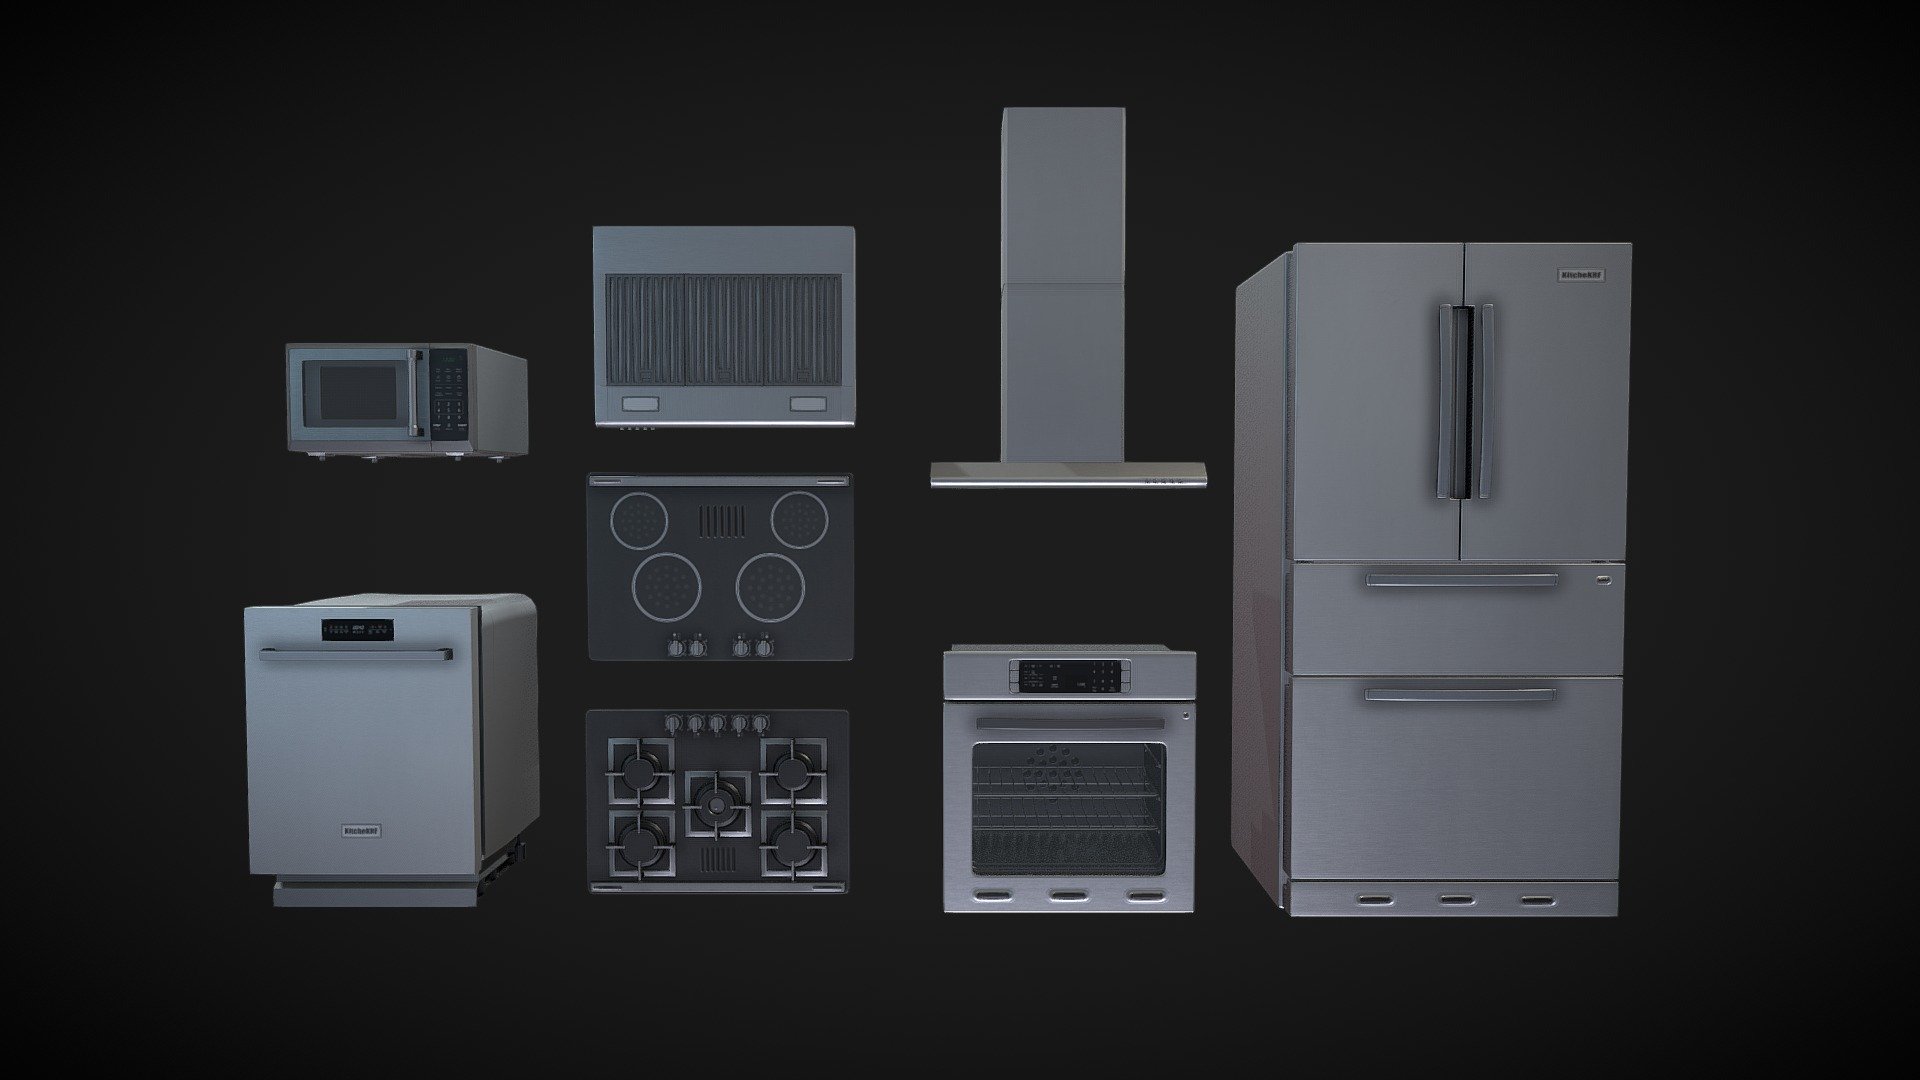 This set consists of 5 kitchen appliances: stove, dishwasher, fridge, kitchen hood and microwave. Highlights that elements such as the kitchen, microwave and dishwasher are not only externally modeled, but also have internal details. This feature adds an additional level of realism and detail to the objects, offering a more complete and authentic representation of these appliances within a kitchen environment.

Game-ready models.

PBR textures.

Up to 2K texture resolution.

Clean UVs.

Dishwasher_2: 43593 Polygon, 42210 Tris, 21803 **Verts **

Fridge_2: 11538 Polygon, 11256 Tris, 5886 **Verts **

Kitchen_Hood_2: 6166 Polygon, 5751 Tris, 3256 **Verts **

Microwave_2: 12020 Polygon, 11518 Tris, 5887 **Verts **

Stove_2: 46863 Polygon, 45424 Tris, 23622 Verts - Kitchen Pack - Buy Royalty Free 3D model by kraffing Studio (@kraffing) 3d model